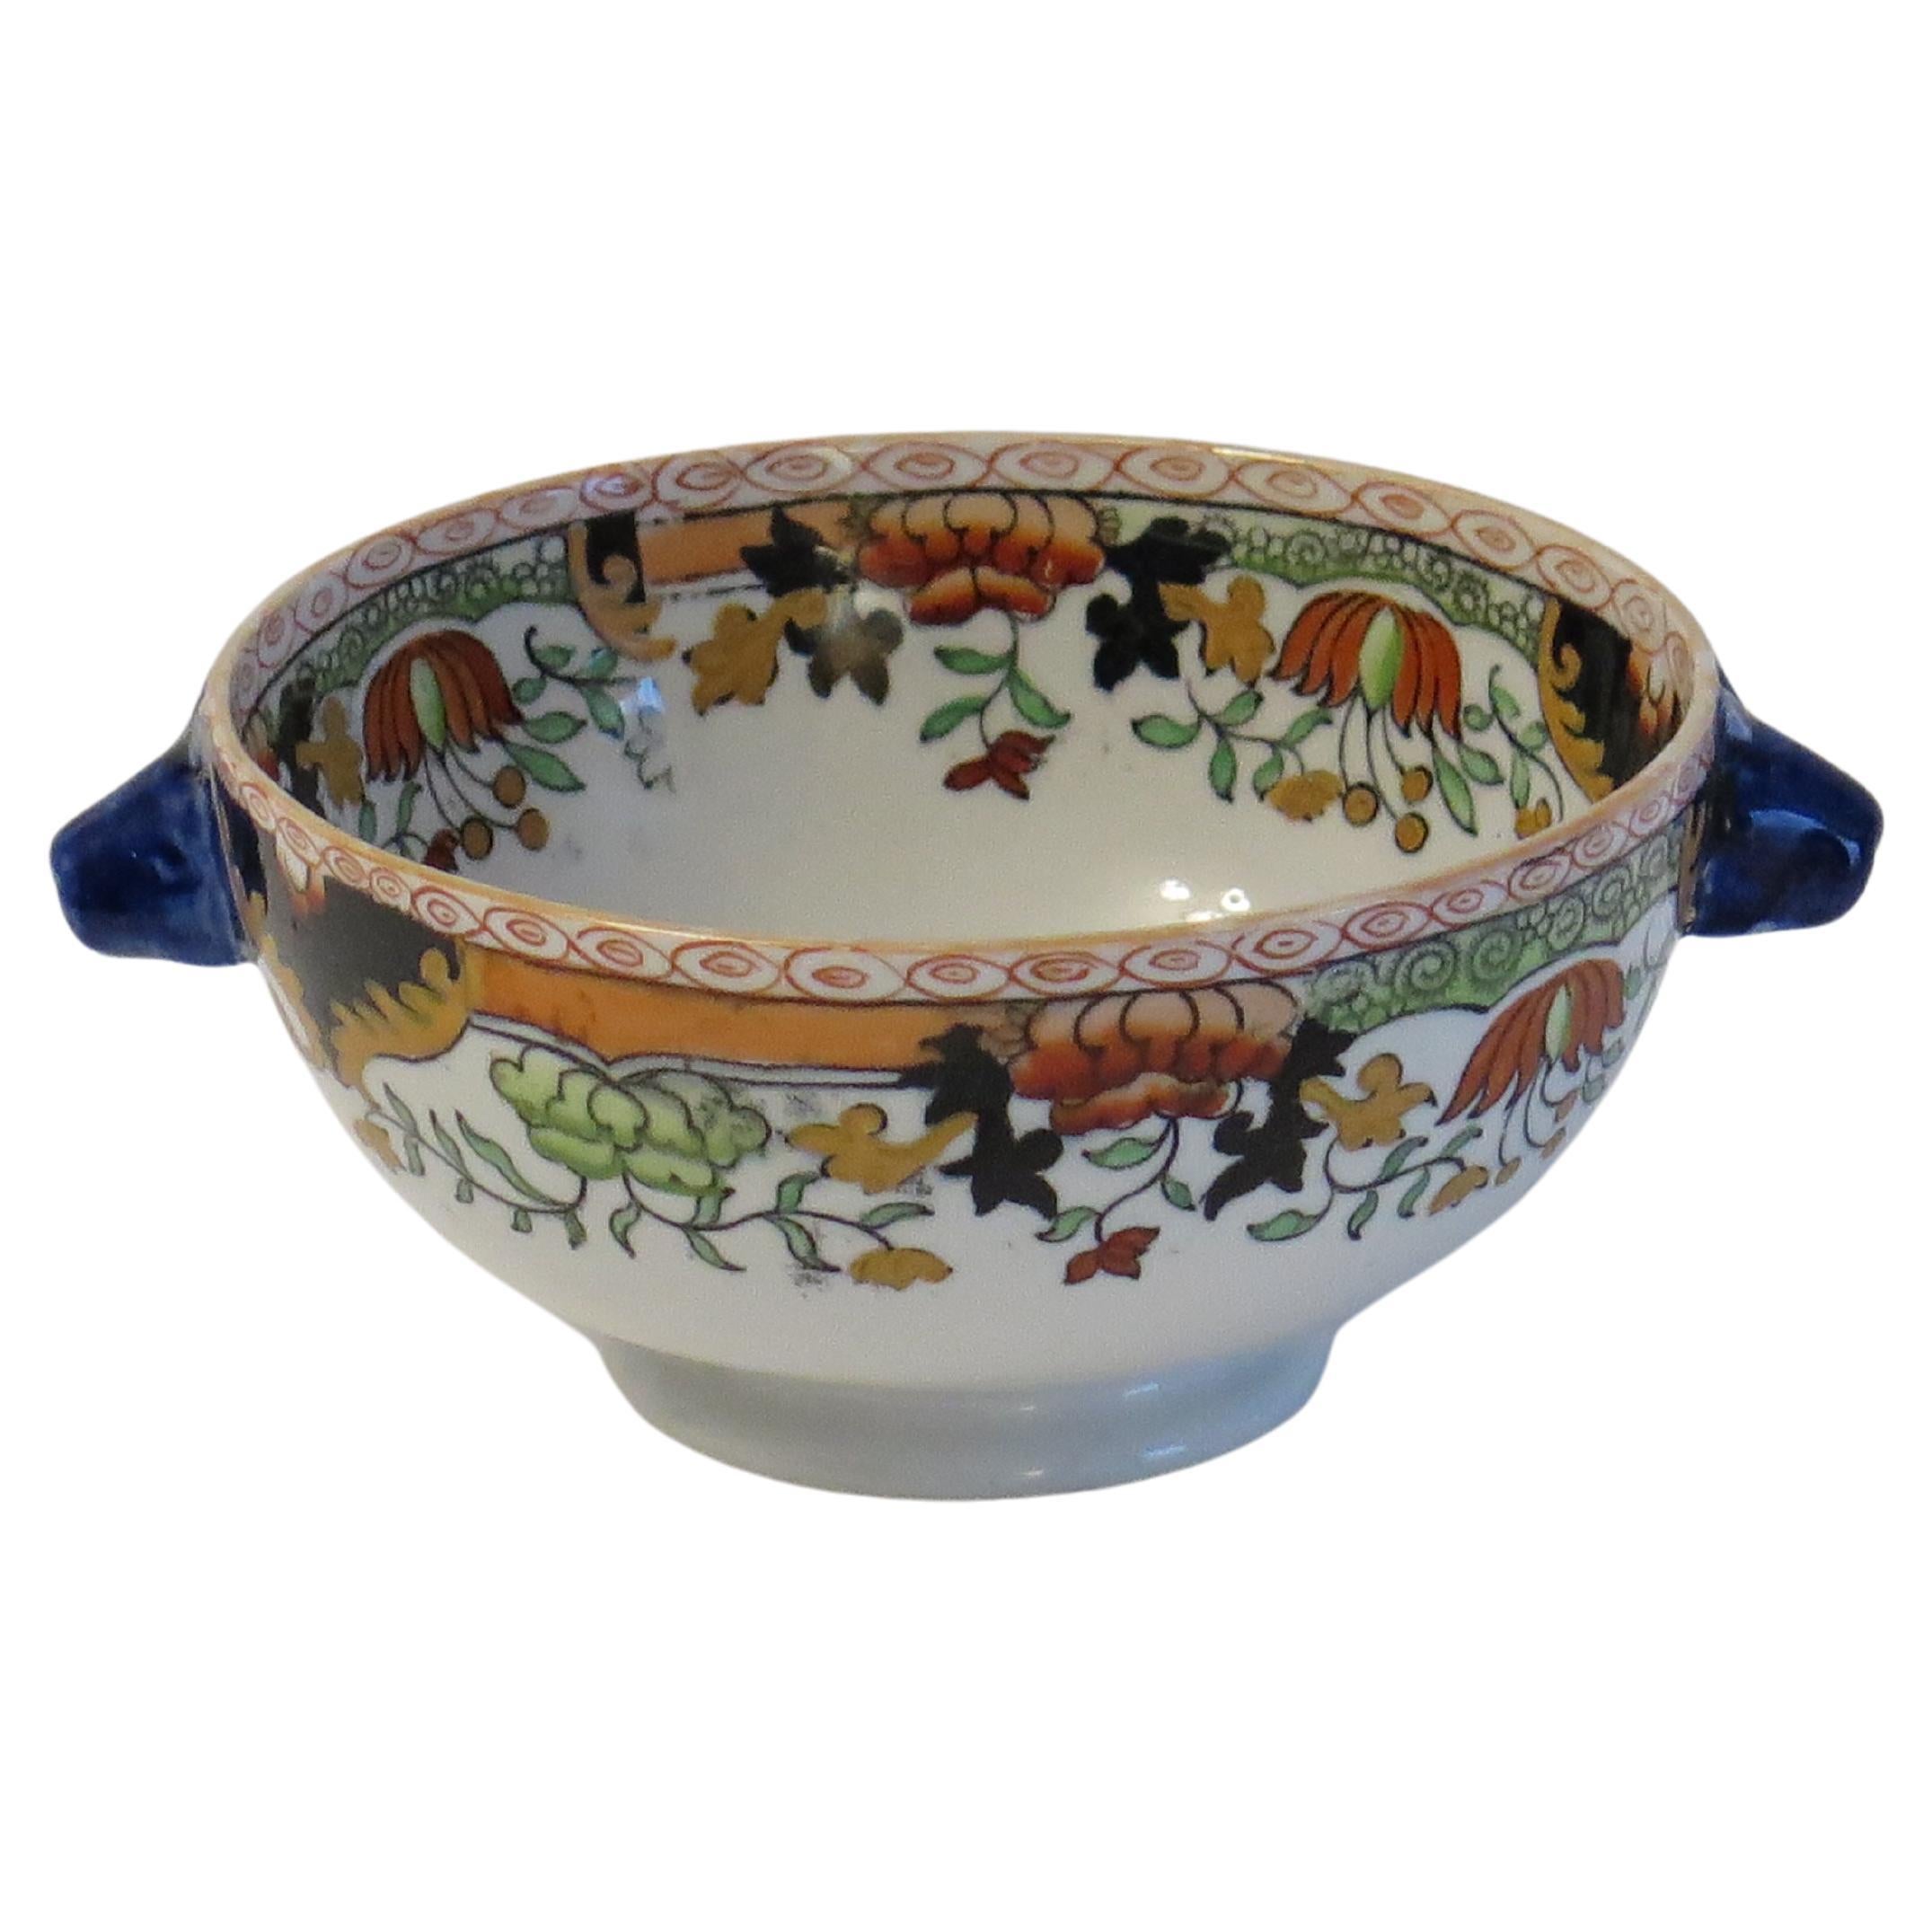 This is a twin boar handled open Bowl made by Mason's Ironstone in the rare Peacock, Peony and rock pattern, dating to the early / mid 19th century, circa 1835 to 1840..

Mason's bowls in this shape with the Boar or Pig side handles are rare. 

The